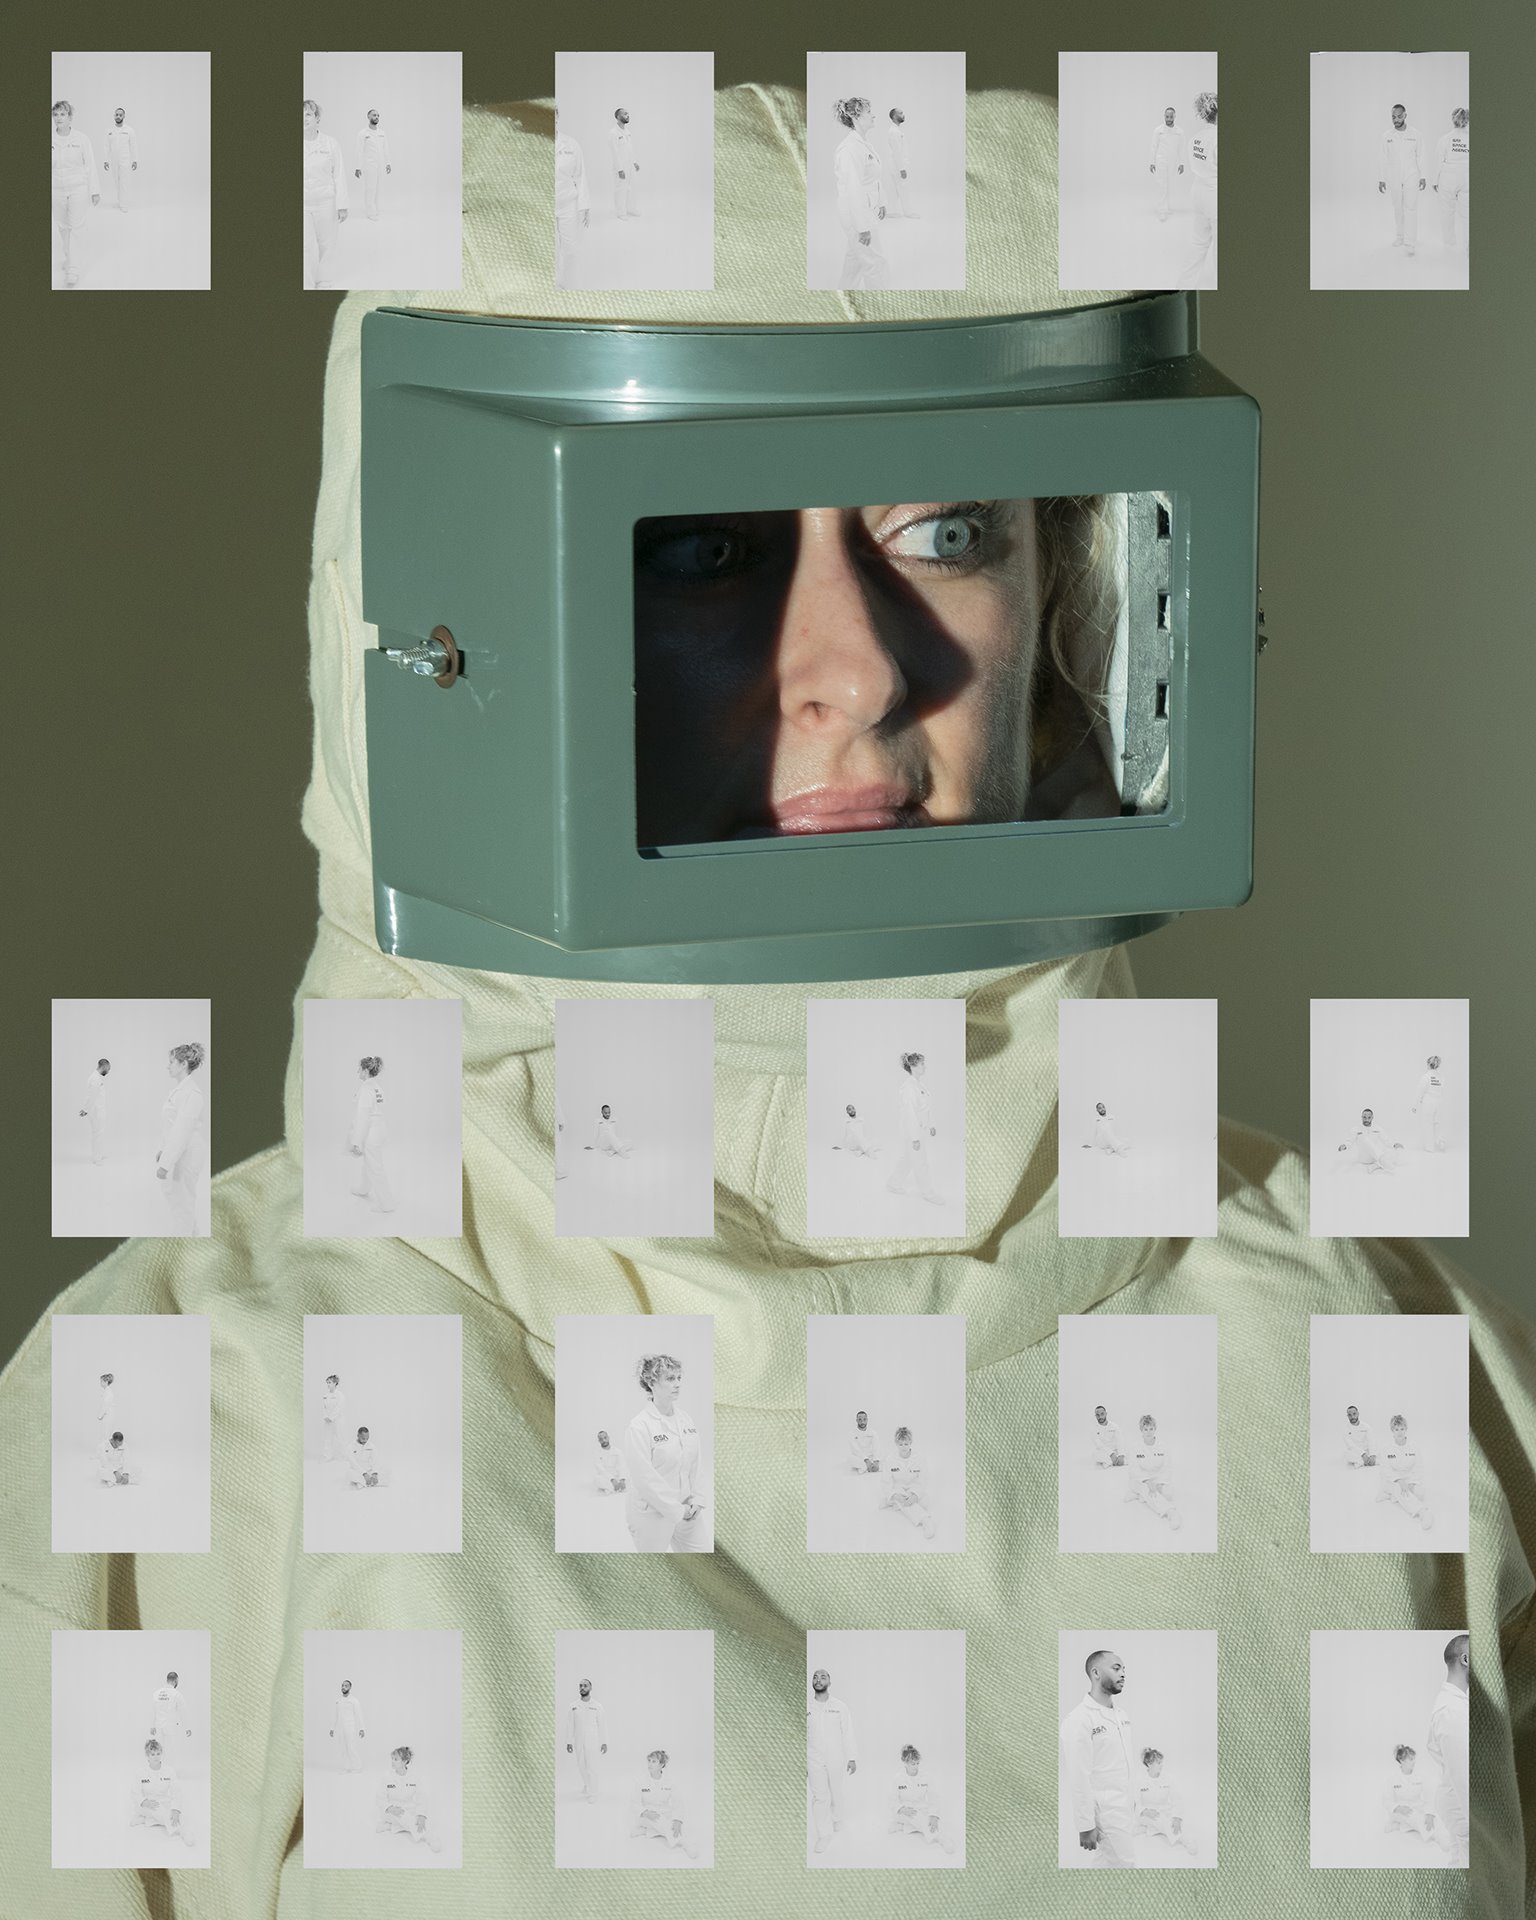 Dr. Brandy Nunez, represented here as an astronaut from the fictional Gay Space Agency, during &lsquo;space suit tests&rsquo; in Brooklyn, New York, United States. This image is overlaid with photographs of LGBTQI+ aspiring astronauts Nunez and Isaac Charles Anderson&rsquo;s real-life isolation tests later that day, part of their training to become astronauts for the Gay Space Agency.&nbsp;